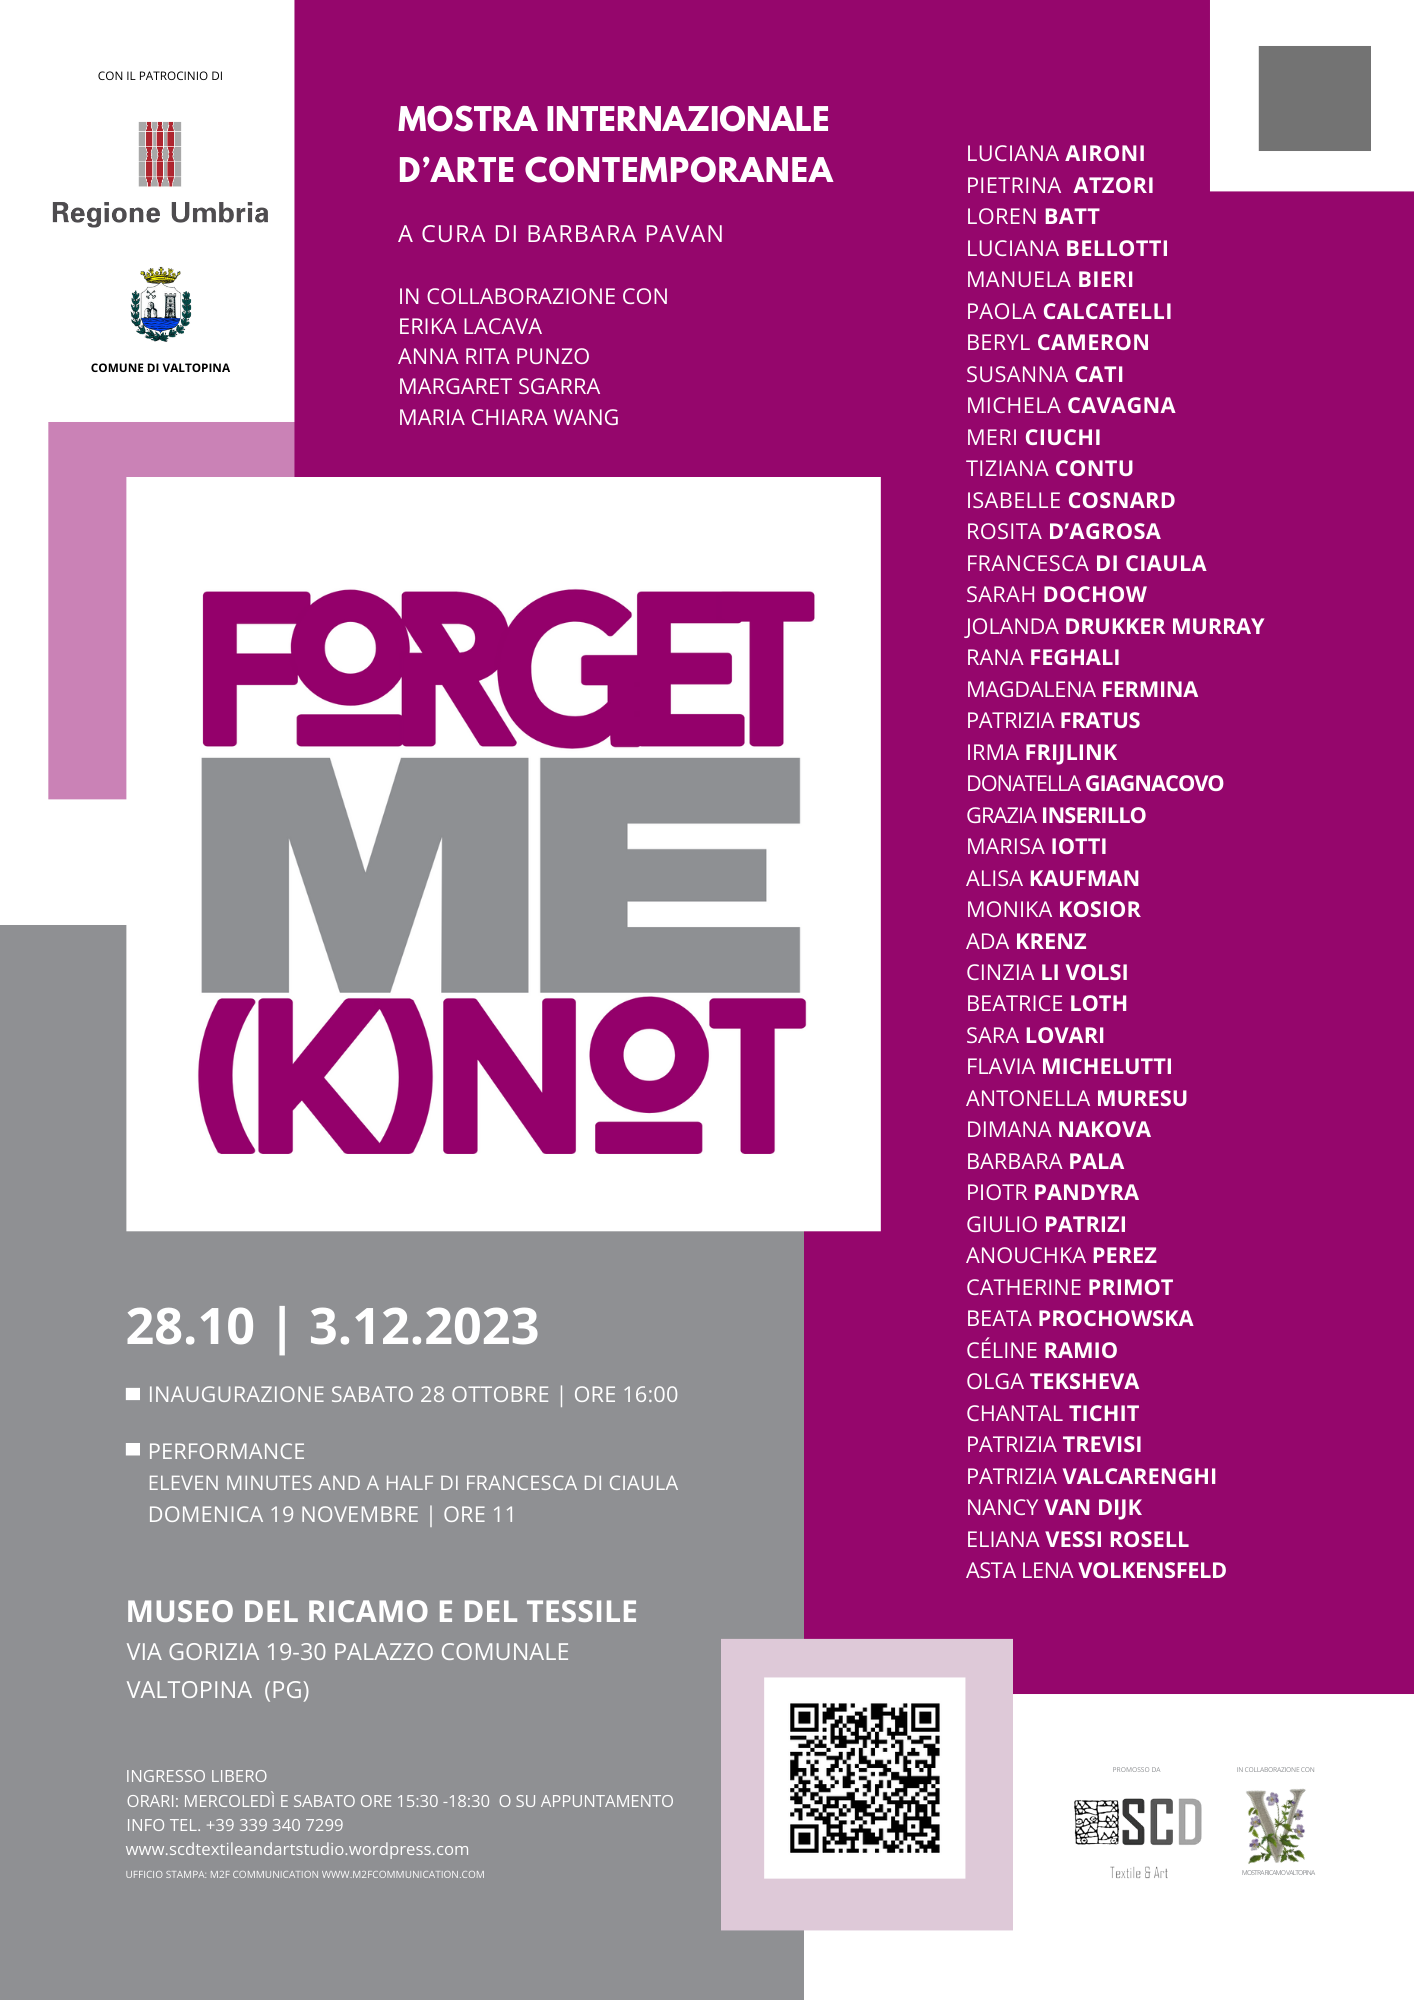 KABUL/ FORGETME(K)NOT exhibition